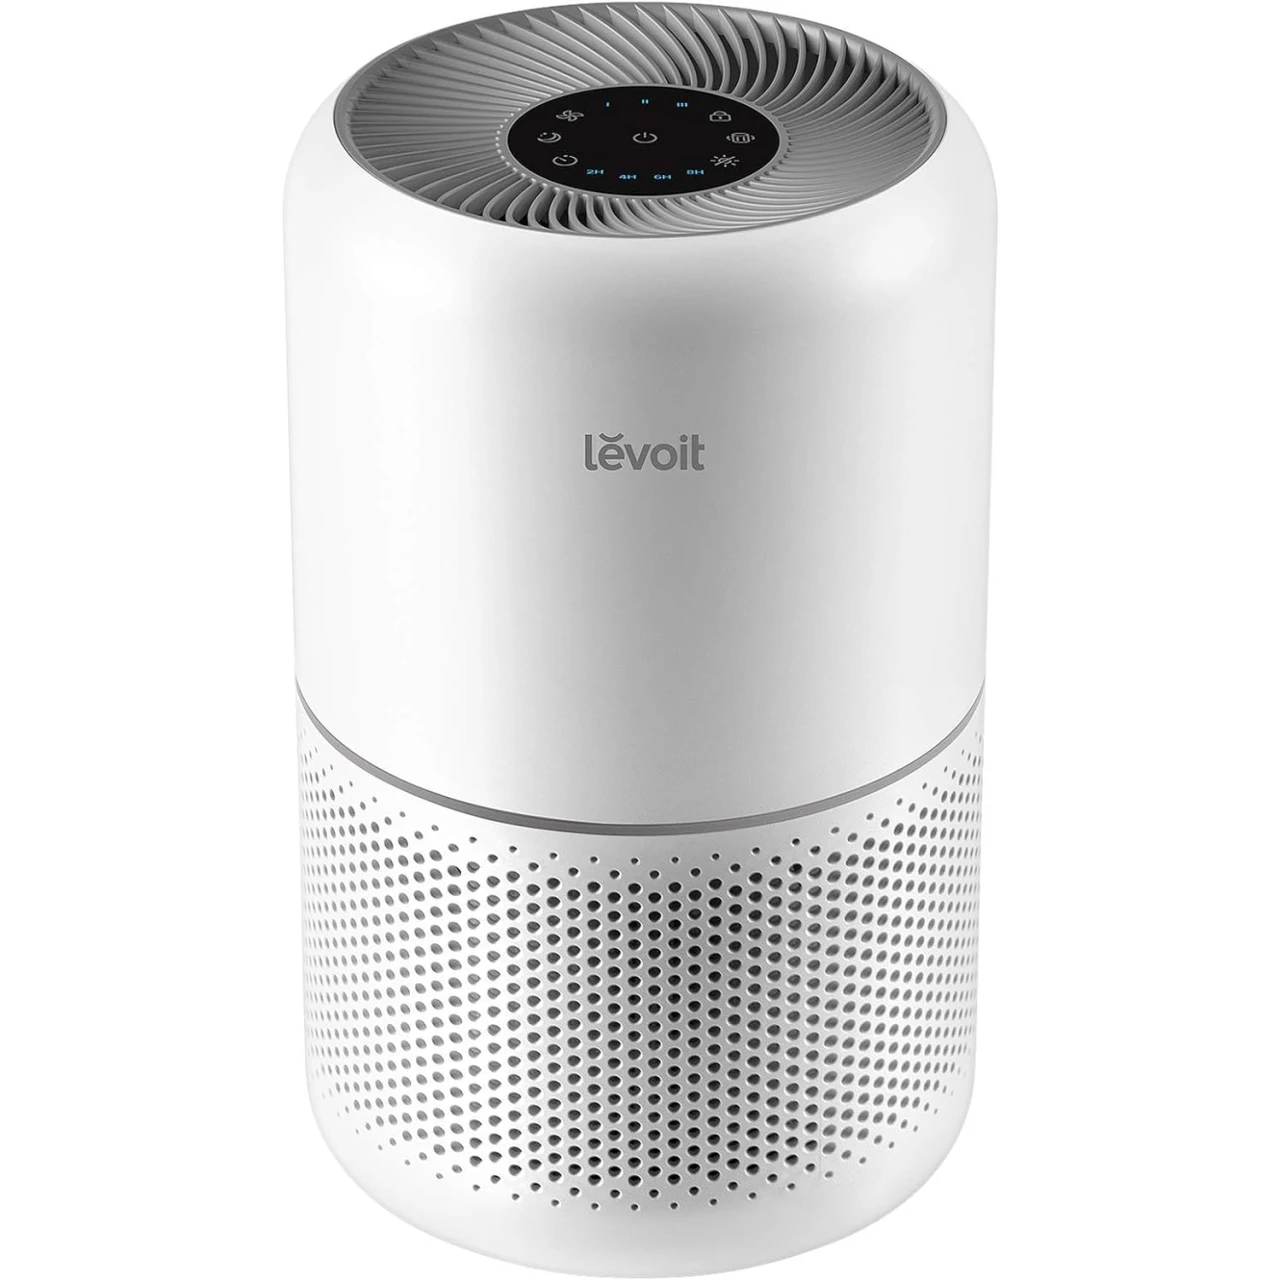 LEVOIT Air Purifier for Home Allergies Pets Hair in Bedroom, HEPA Filter, Covers Up to 1095 Sq.Foot Powered by 45W High Torque Motor, Remove Dust Smoke Pollutants, 0.3 Microns, Core 300, White